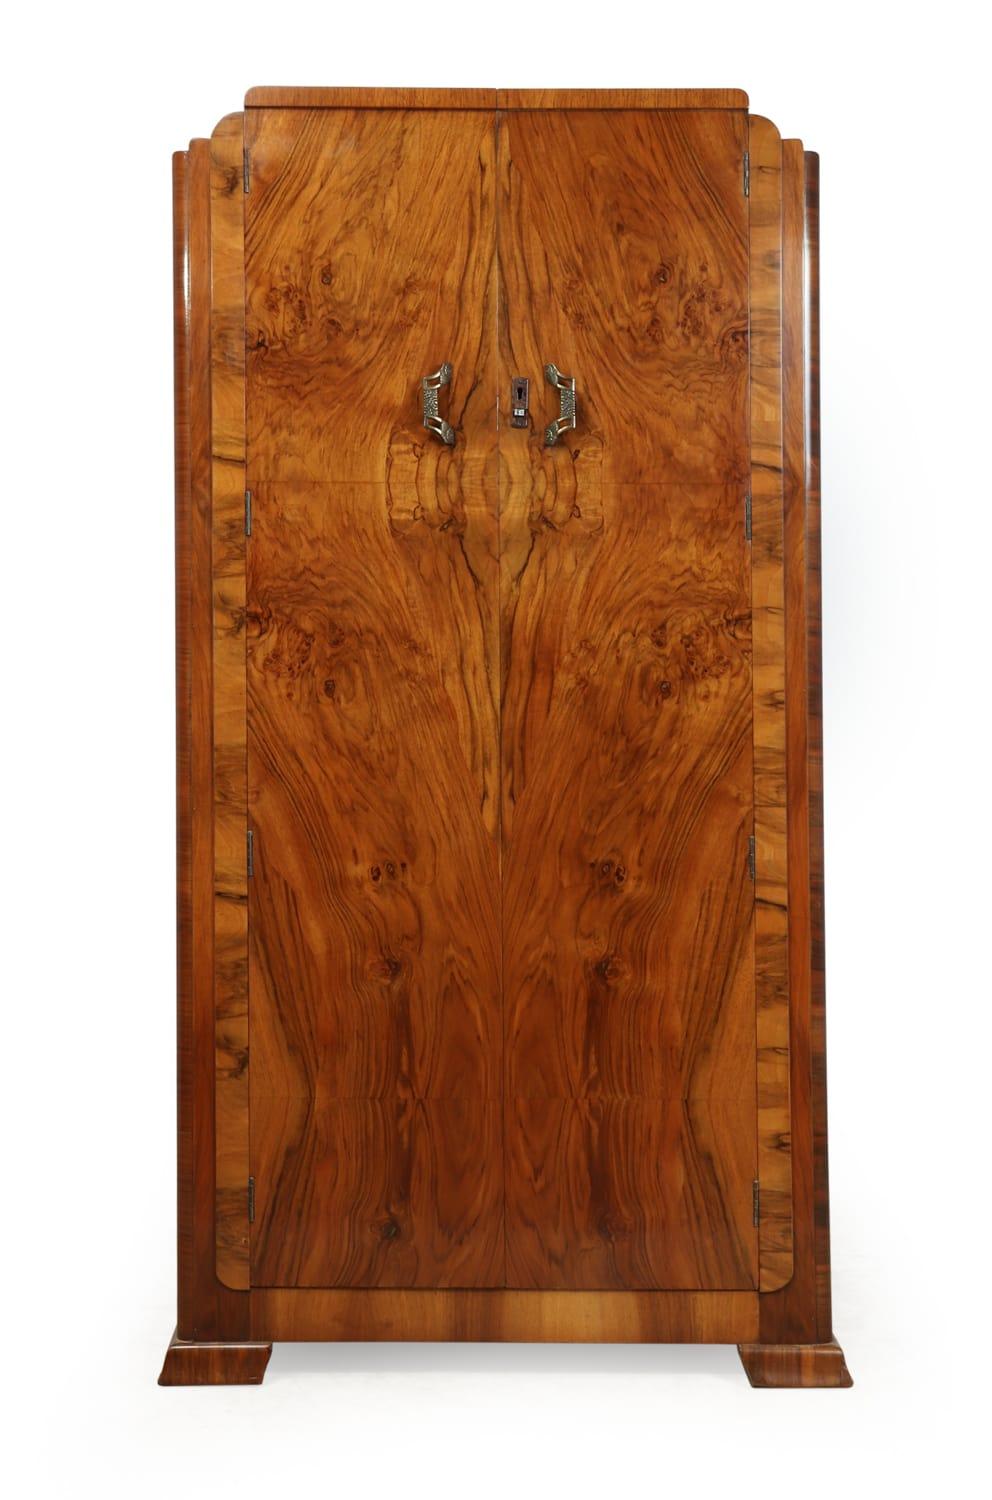 Art Deco gentleman's wardrobe
This Art Deco wardrobe has two figured walnut doors with a semi fitted interior the wardrobe is in very good condition and the exterior has been French polished

Age: 1930

Style: Art Deco

Material: